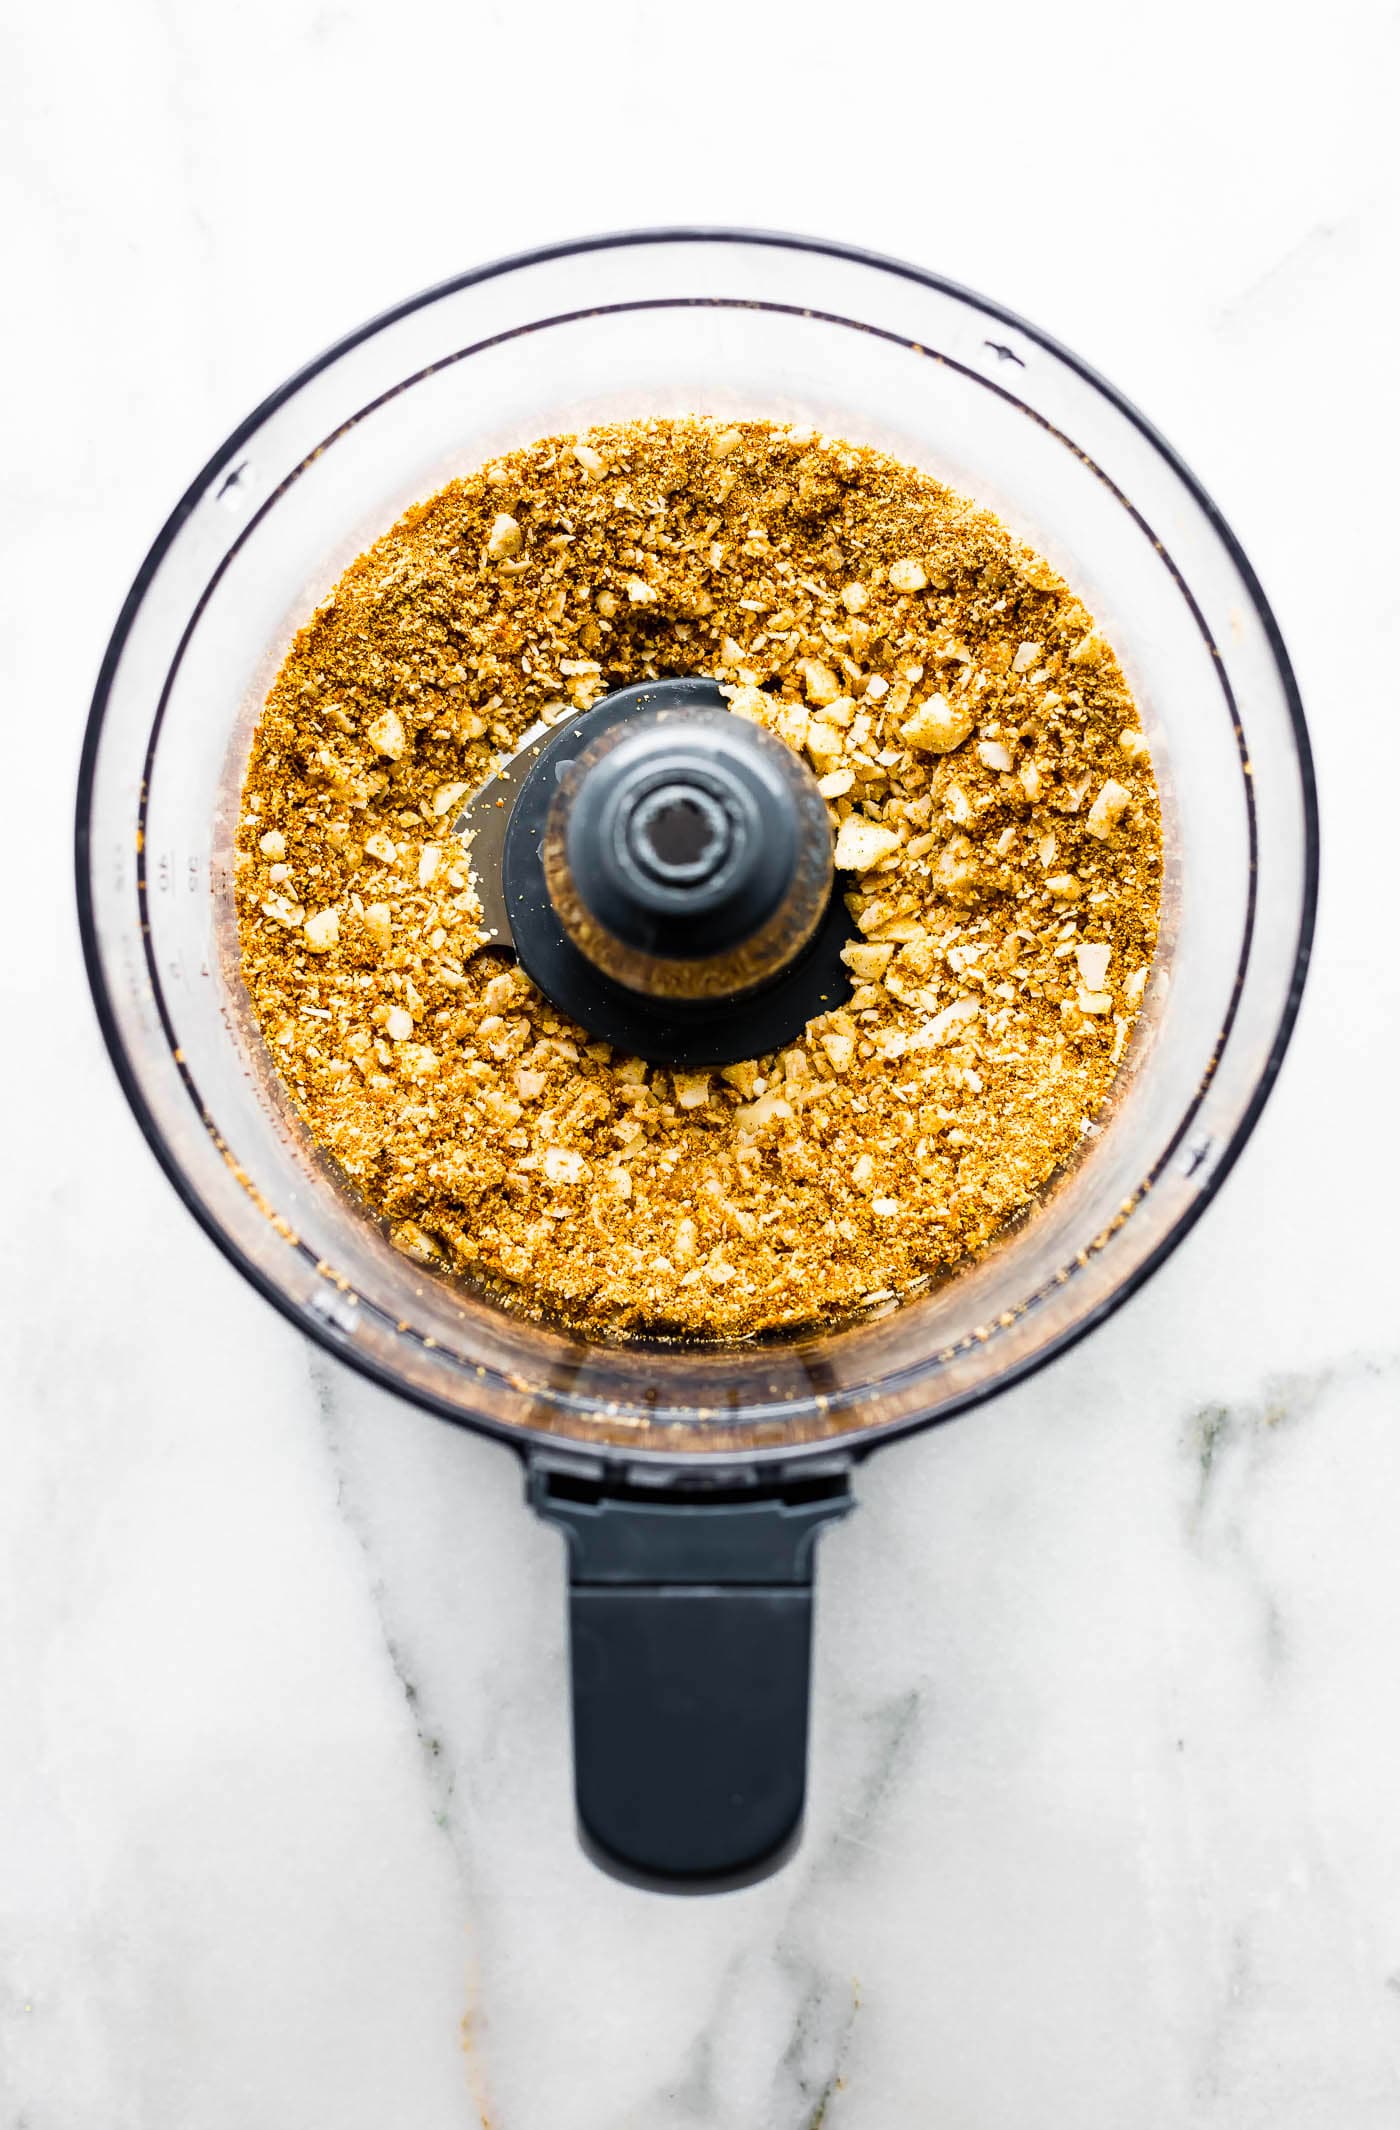 Ground nut topping in a food processor for vegan sweet potato casserole